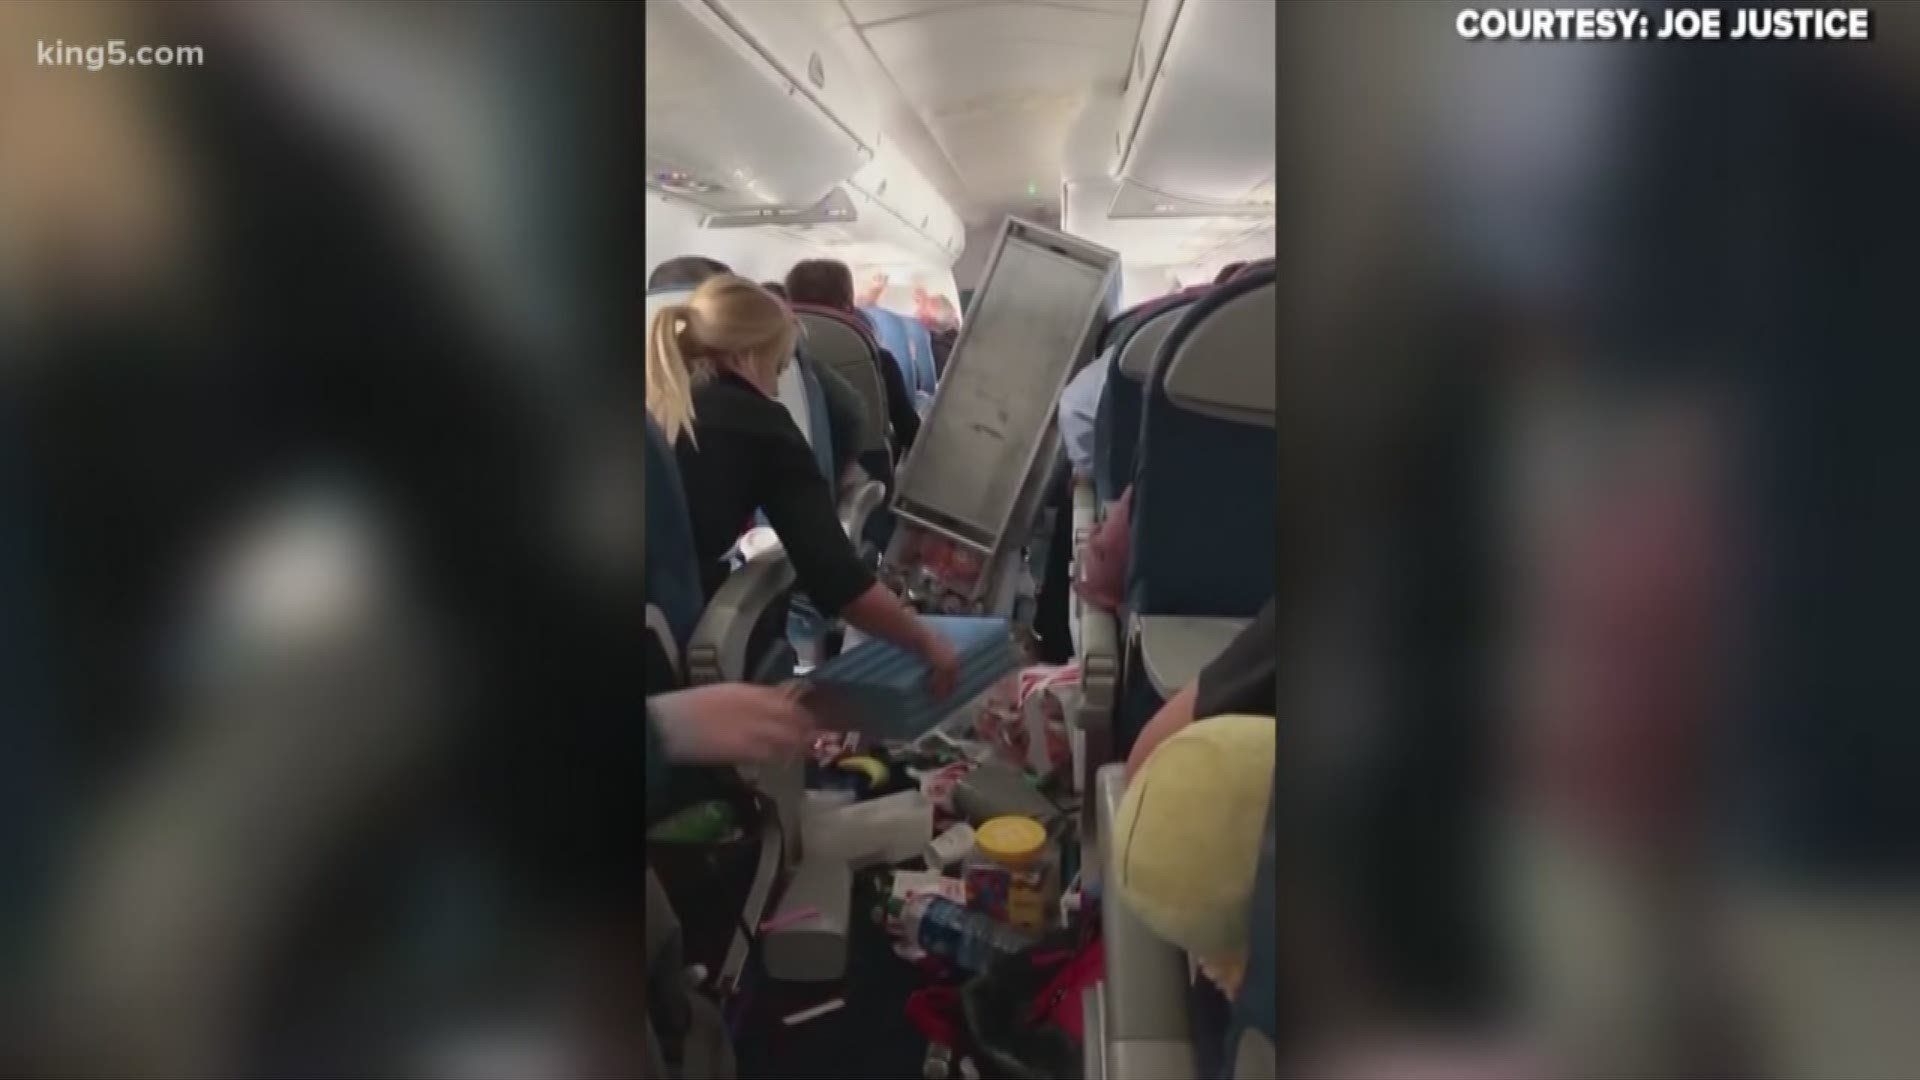 Two passengers and a flight attendant were hospitalized after a Seattle-bound flight made an emergency landing in Reno.